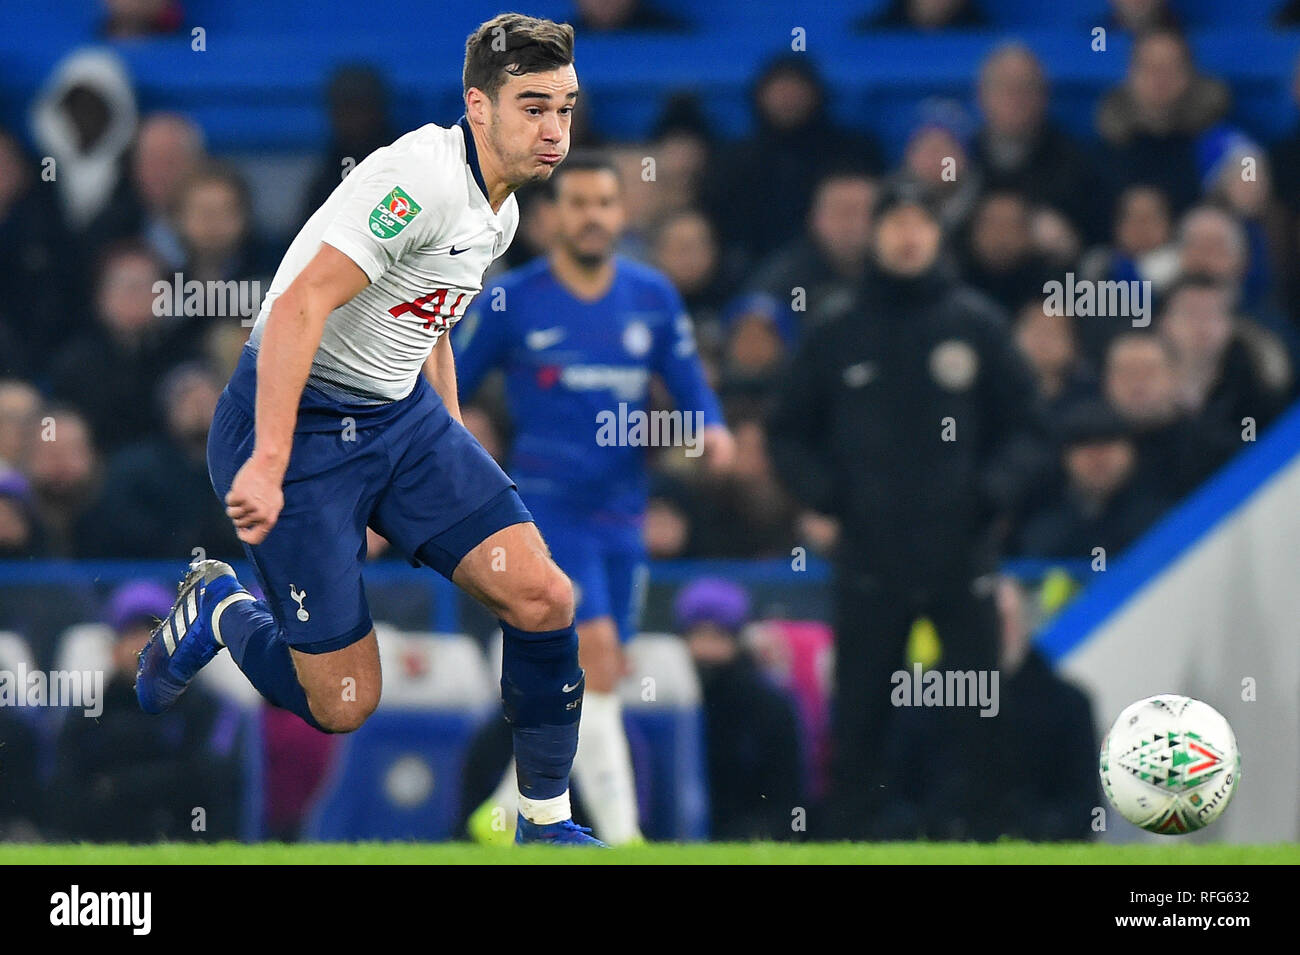 LONDON, UK 24 JANUARY Tottenham midfielder Harry Winks in action during the Carabao Cup match between Chelsea and Tottenham Hotspur at Stamford Bridge, London on Thursday 24th January 2019. (Photo Credit: MI News & Sport) Stock Photo